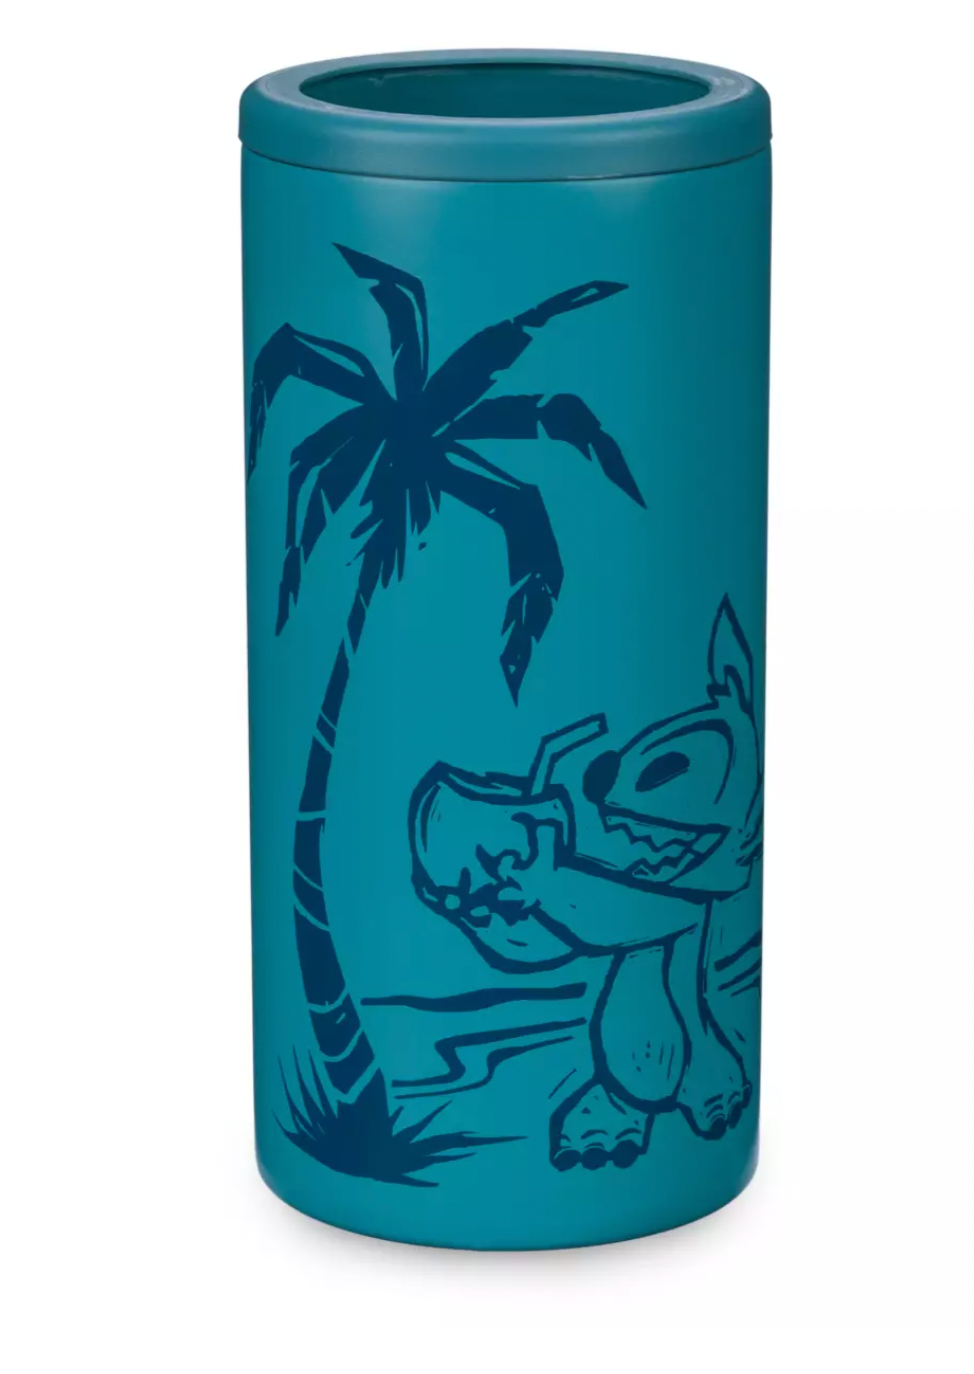 Disney Stitch High Tides and Good Vibes Stainless Steel Can Holder New